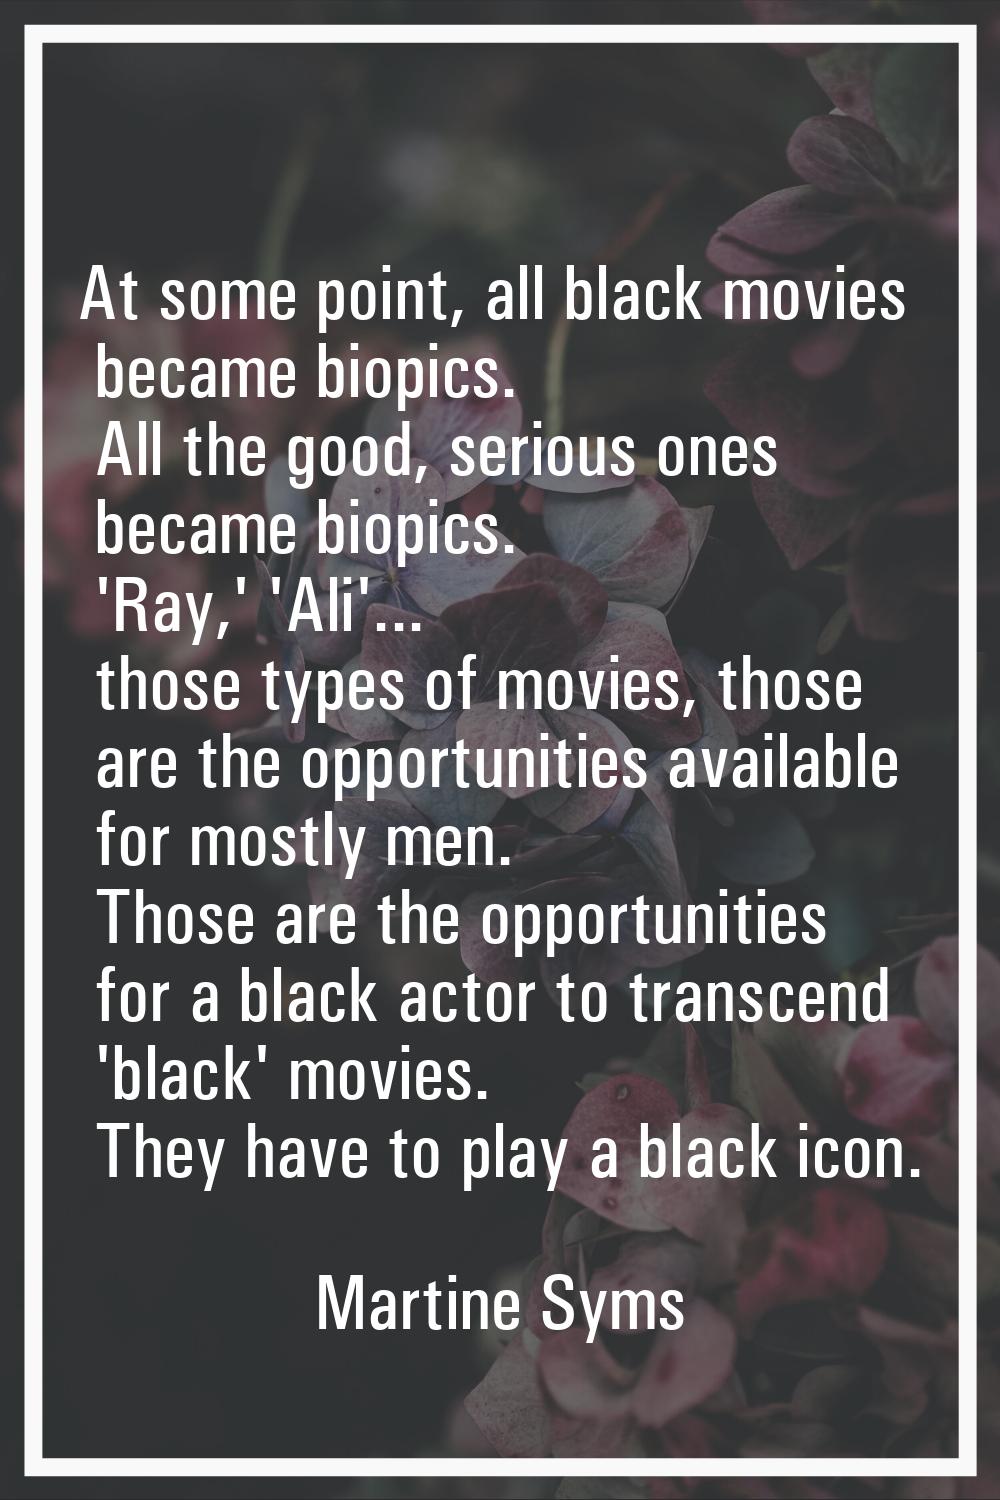 At some point, all black movies became biopics. All the good, serious ones became biopics. 'Ray,' '